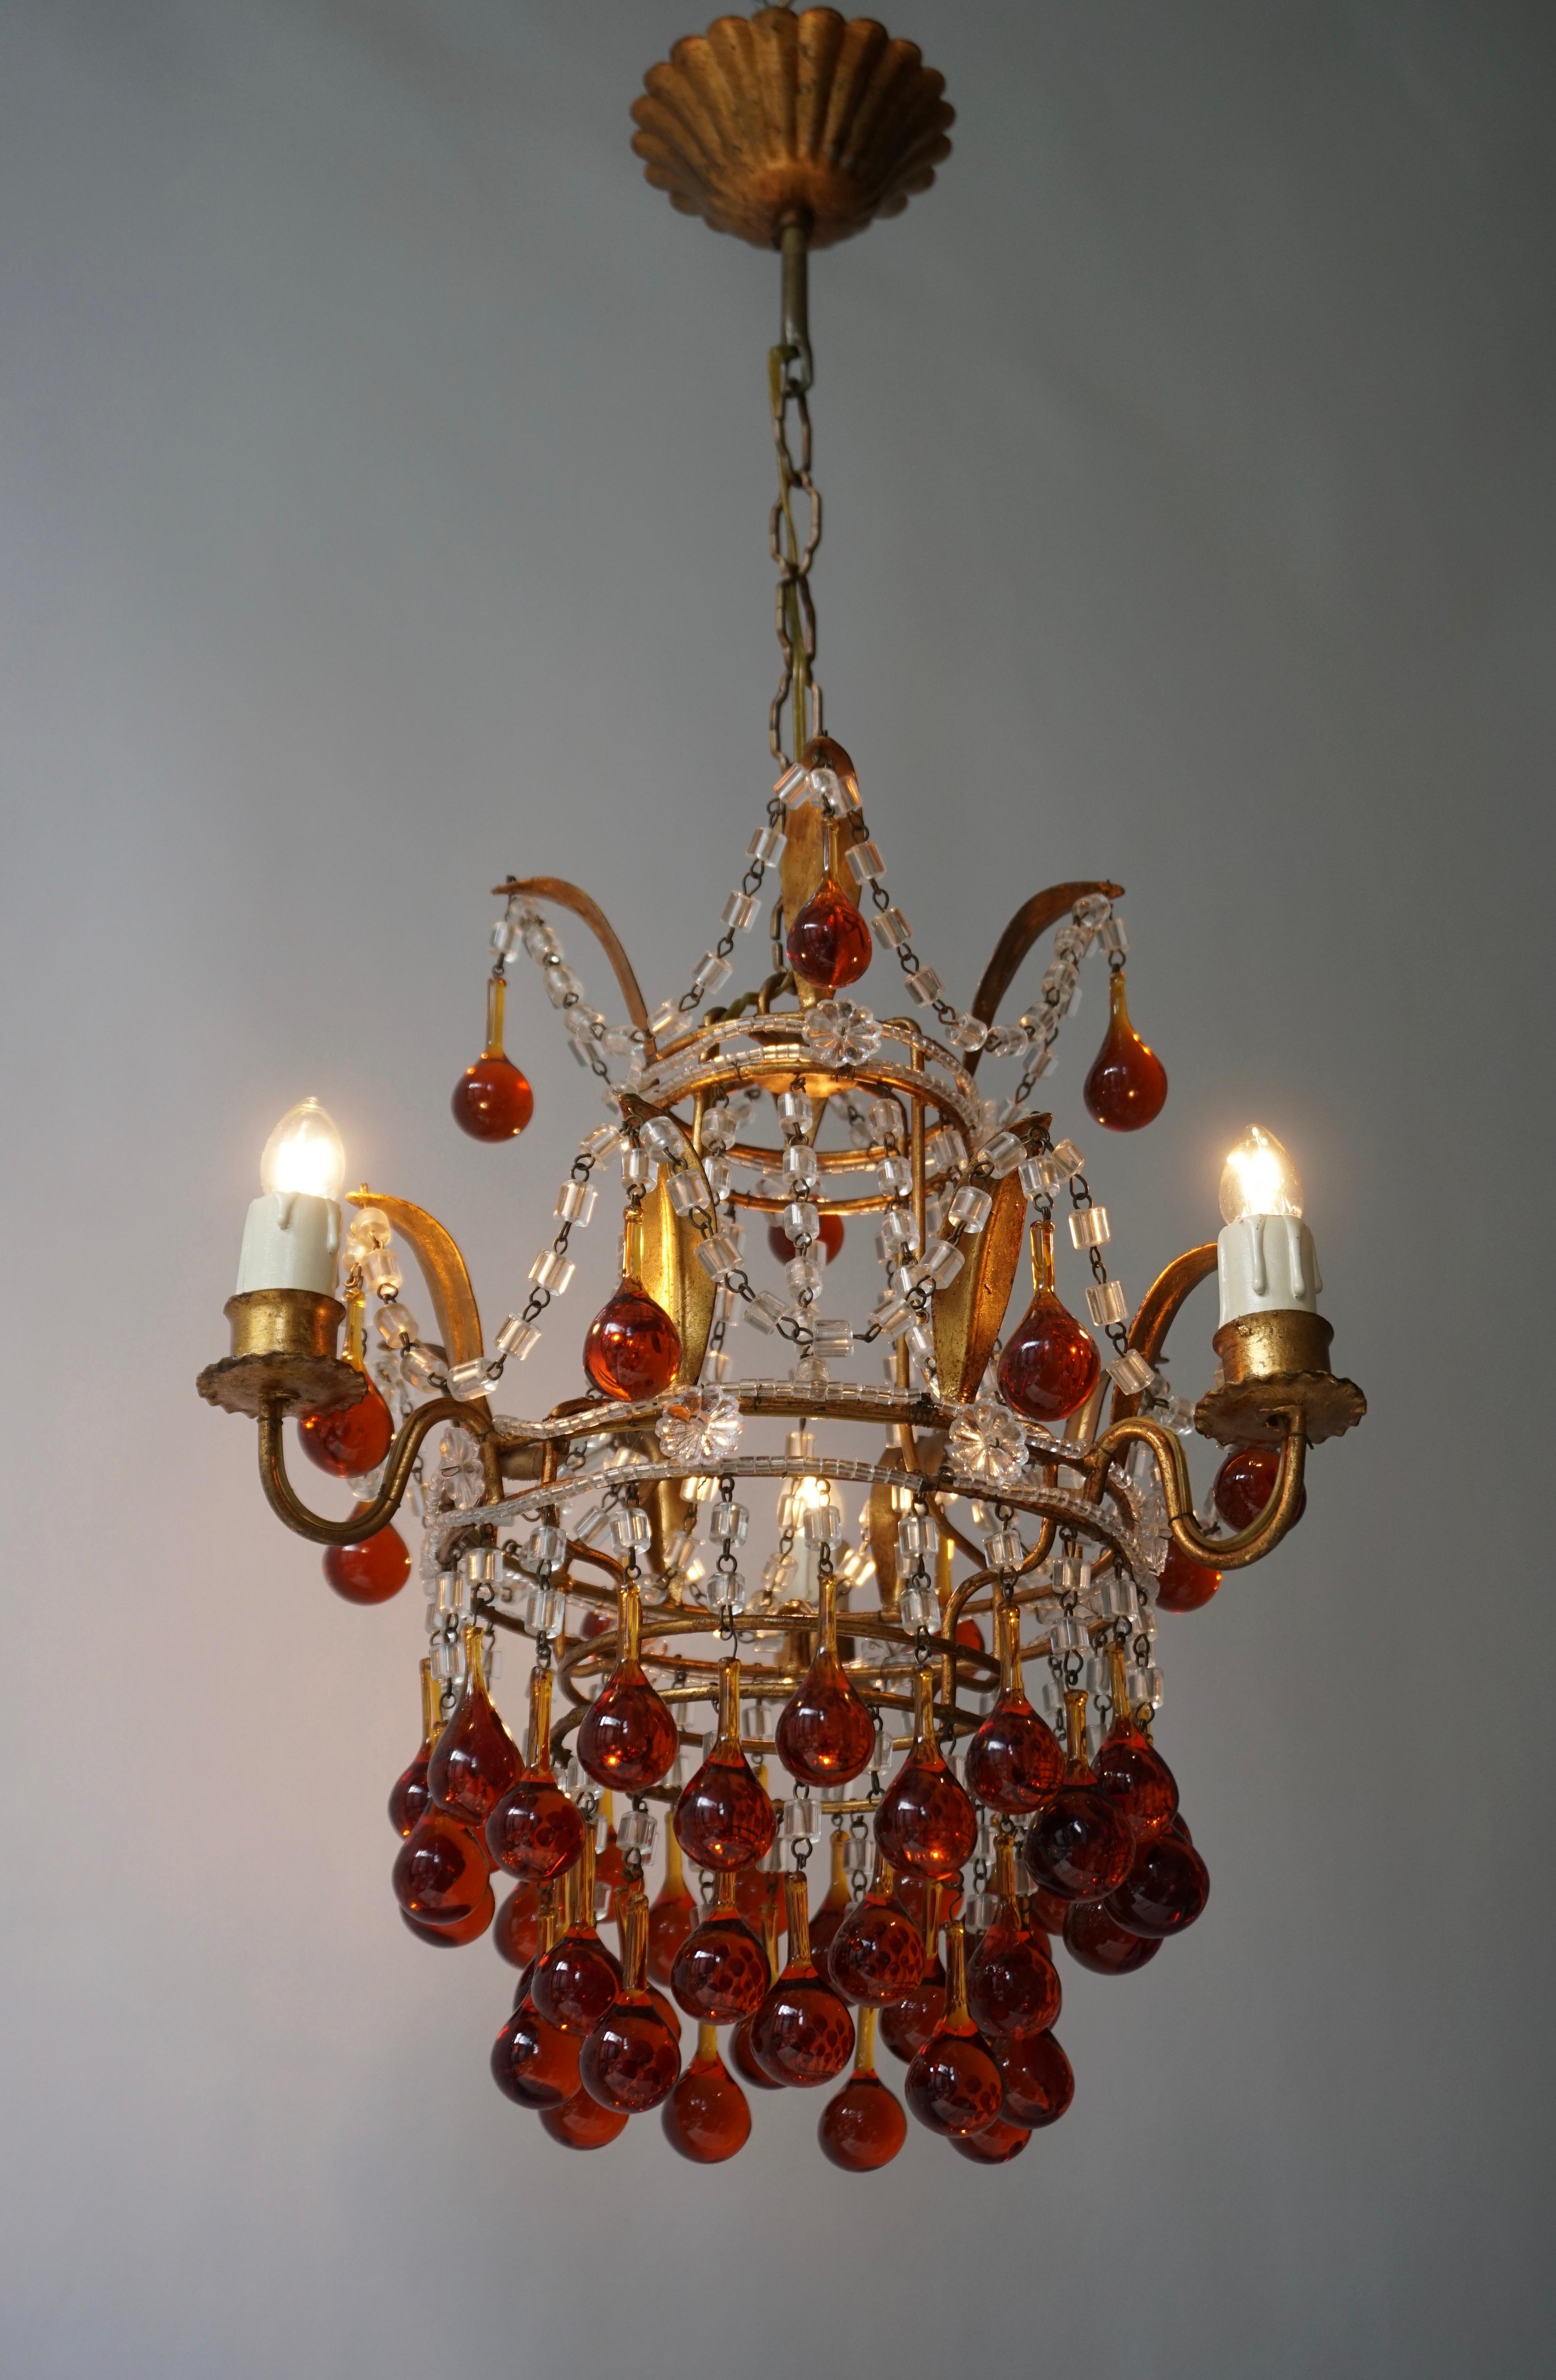 A lovely vintage Venini style chandelier three-light with Murano amber glass teardrops, brass mounts, Italy, 1950s. 

Brass with some wear and agd patina. 

Three E-14 light bulb sockets. 

Dimensions: Total height with chain 72 cm, adjustable